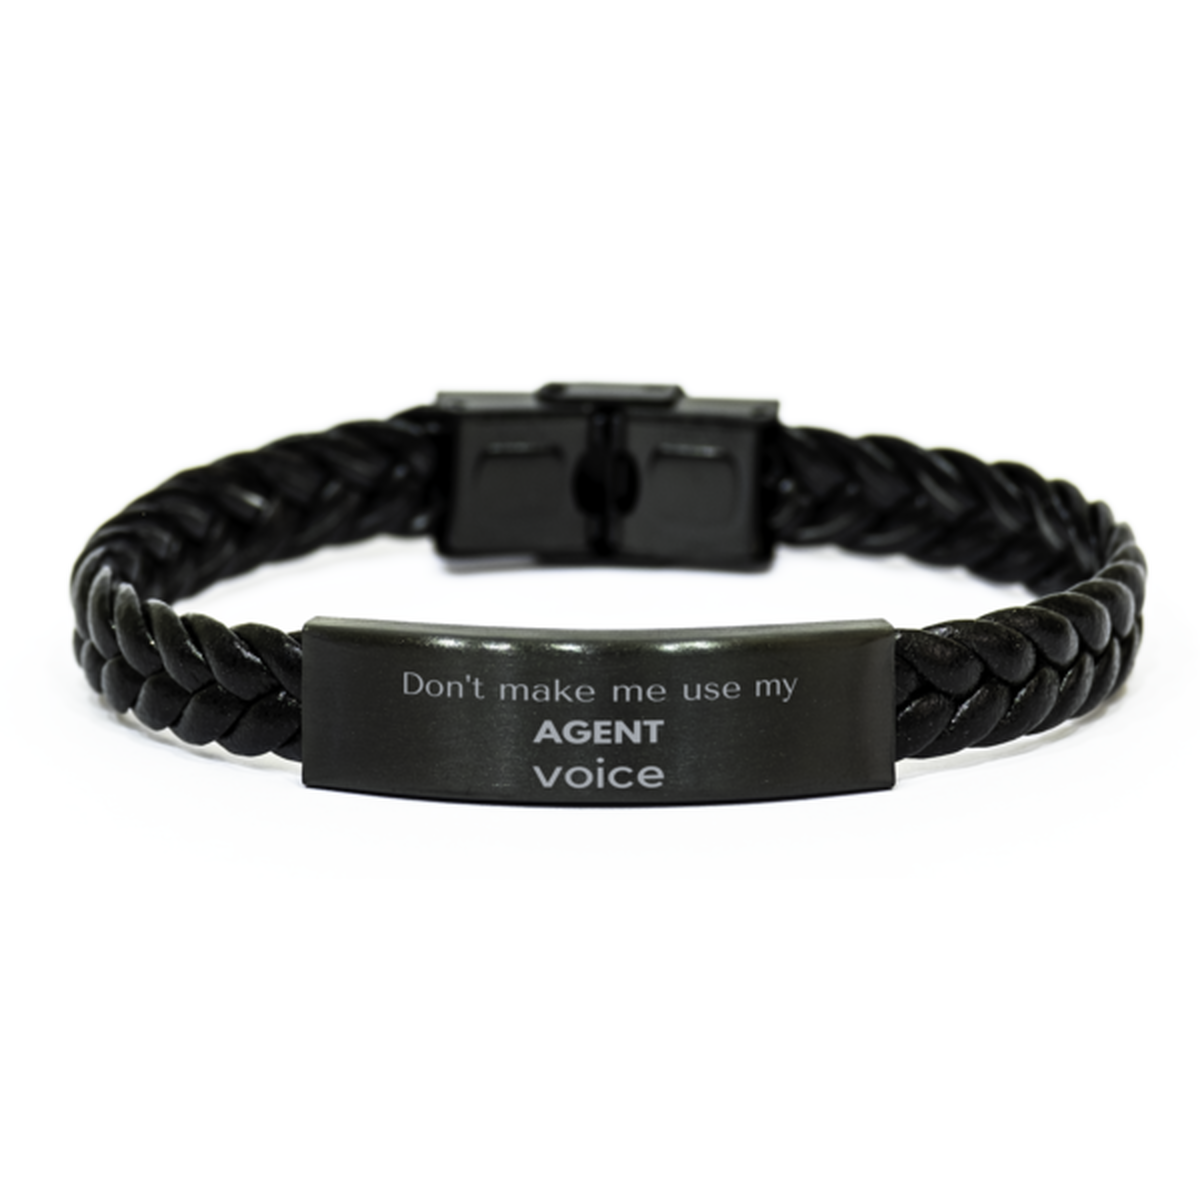 Don't make me use my Agent voice, Sarcasm Agent Gifts, Christmas Agent Braided Leather Bracelet Birthday Unique Gifts For Agent Coworkers, Men, Women, Colleague, Friends